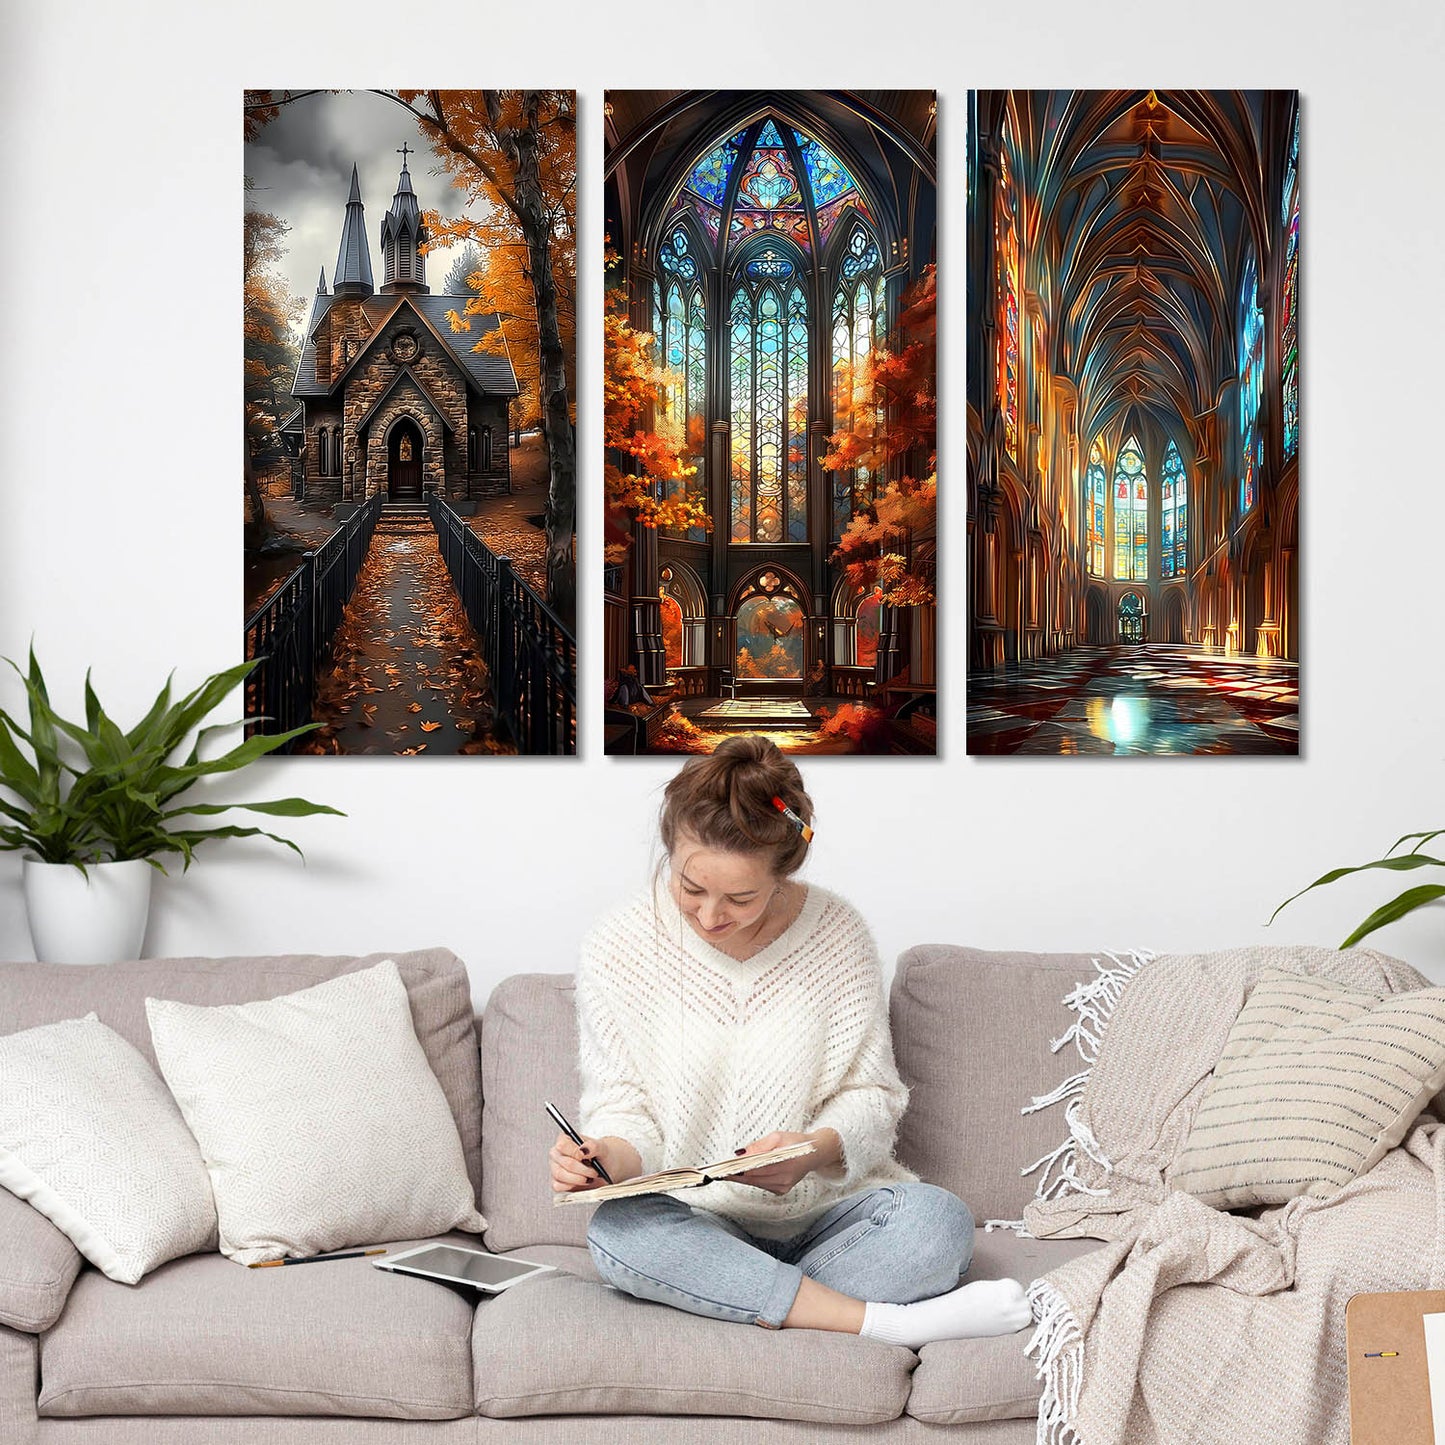 Modern Wall Art Canvas For Home Decor Office Living Room